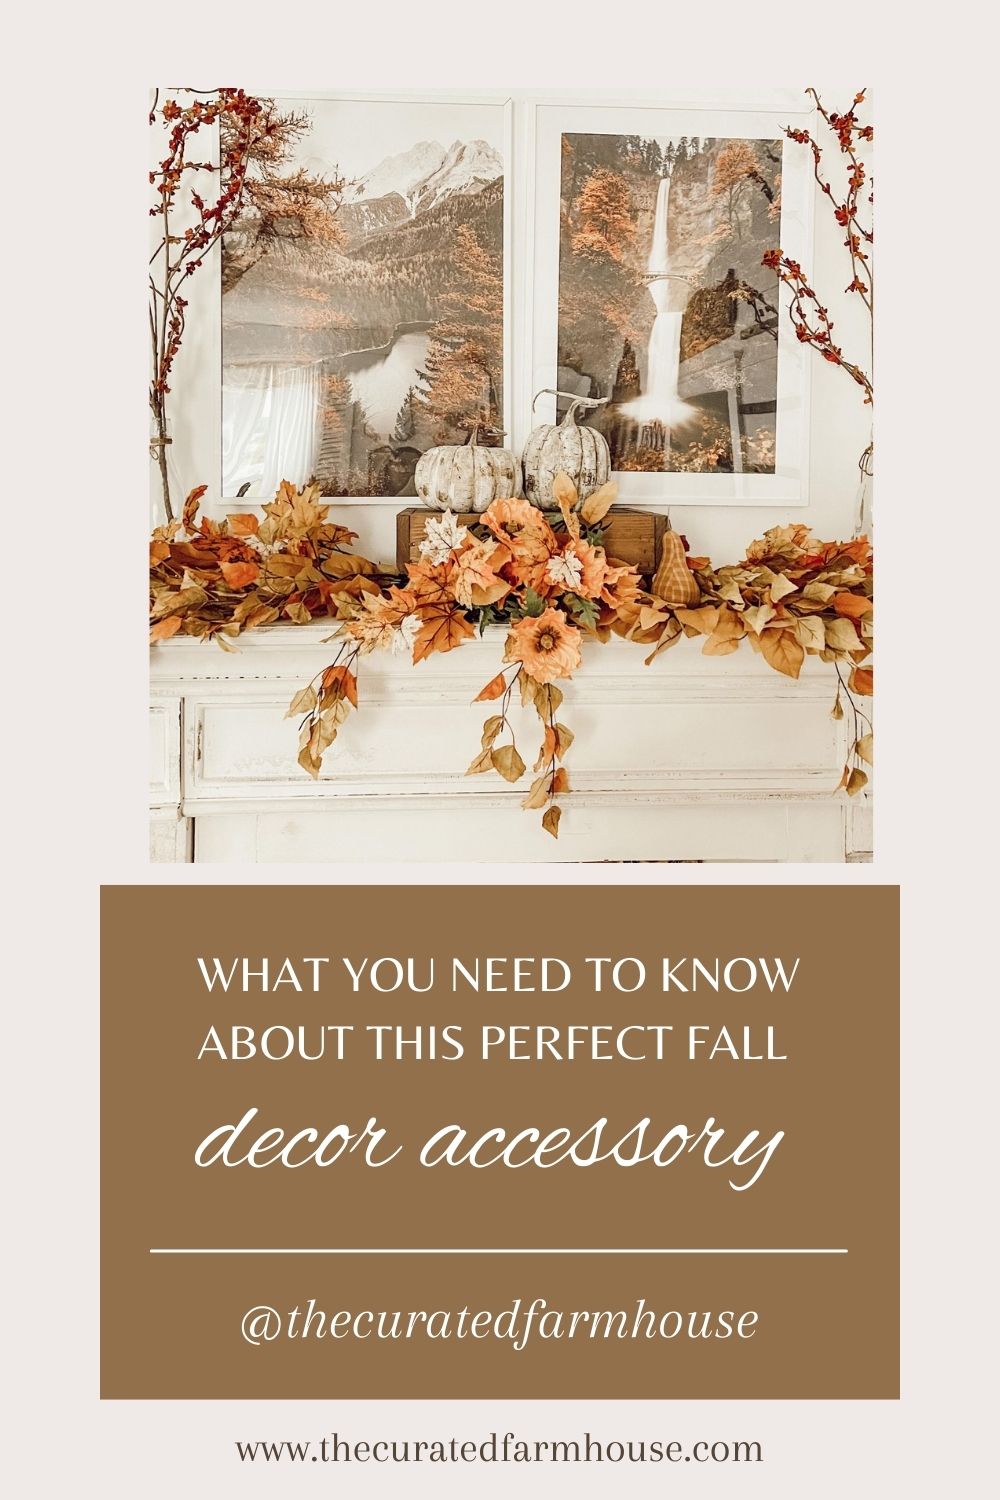 What You Need To Know About This Perfect Fall Decor Accessory